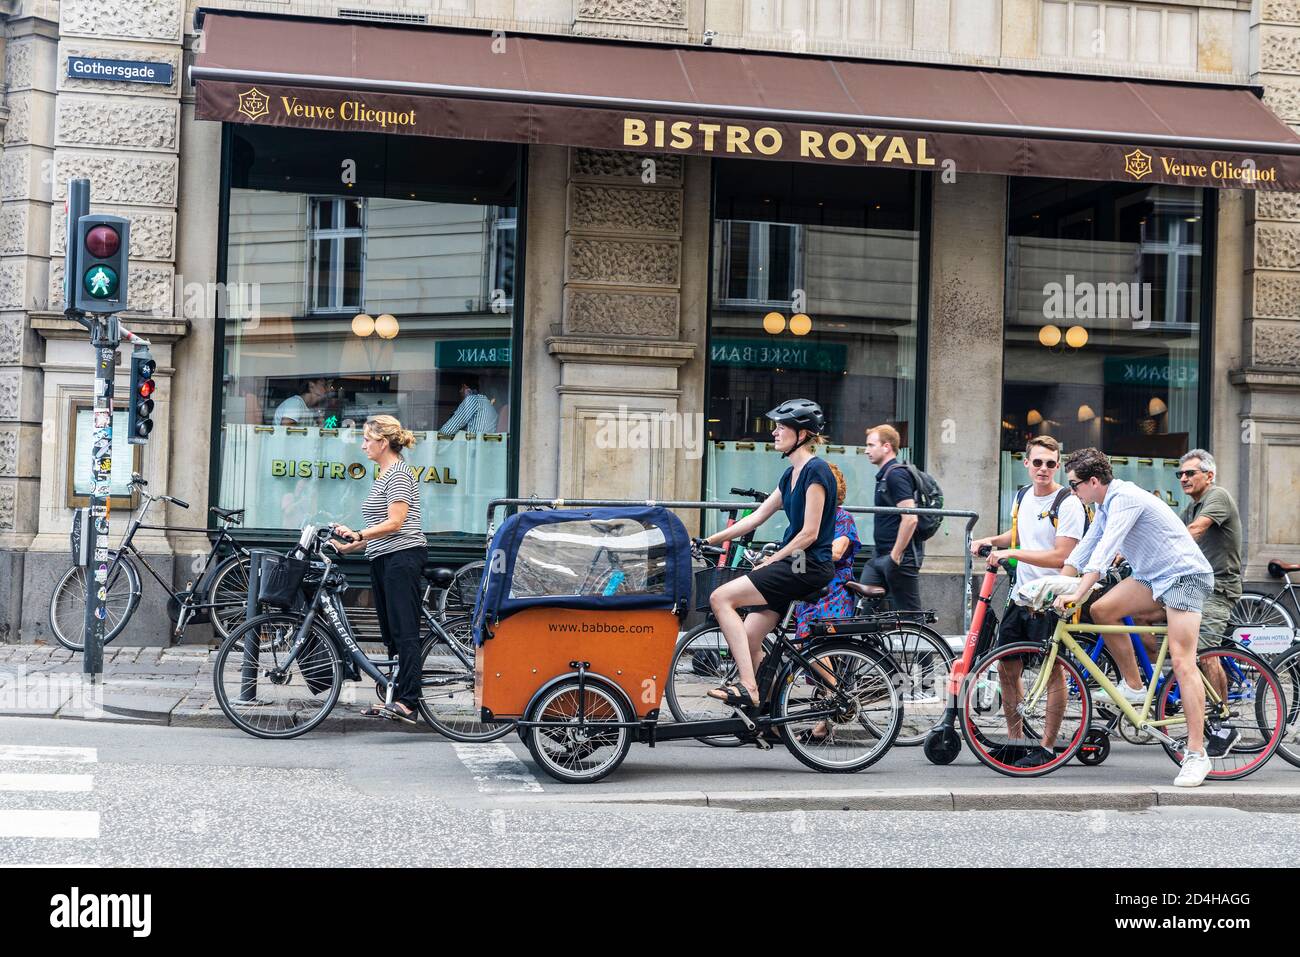 Copenhagen, Denmark - August 27, 2019: Street with people on bicycle and a Babboe cargo bike waiting at a red light in the old town of Copenhagen, Den Stock Photo